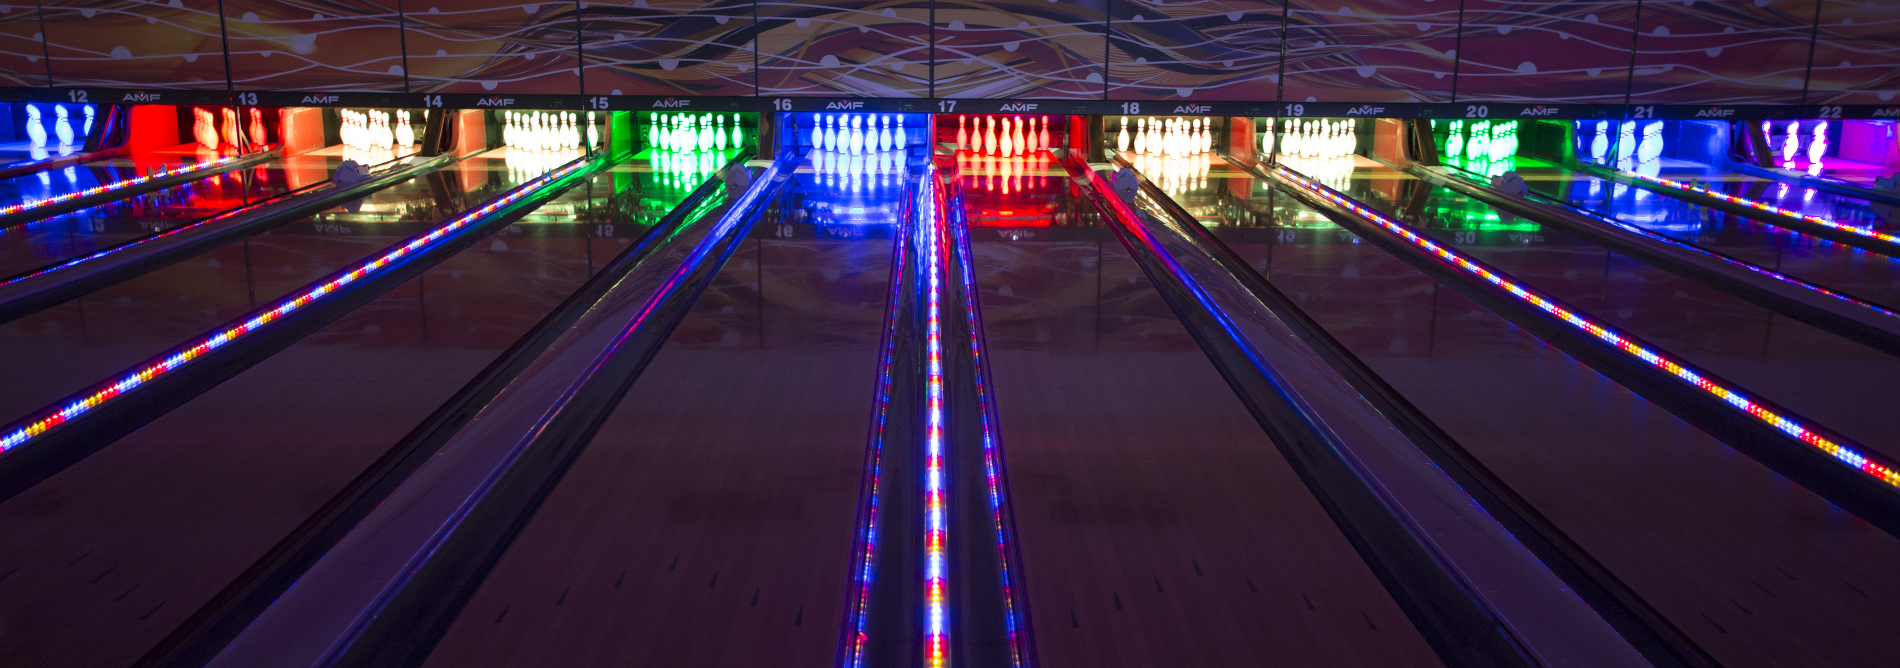 Bowling-QubicaAMF-LANE-ACCESORIES-upgrade-banner.jpg